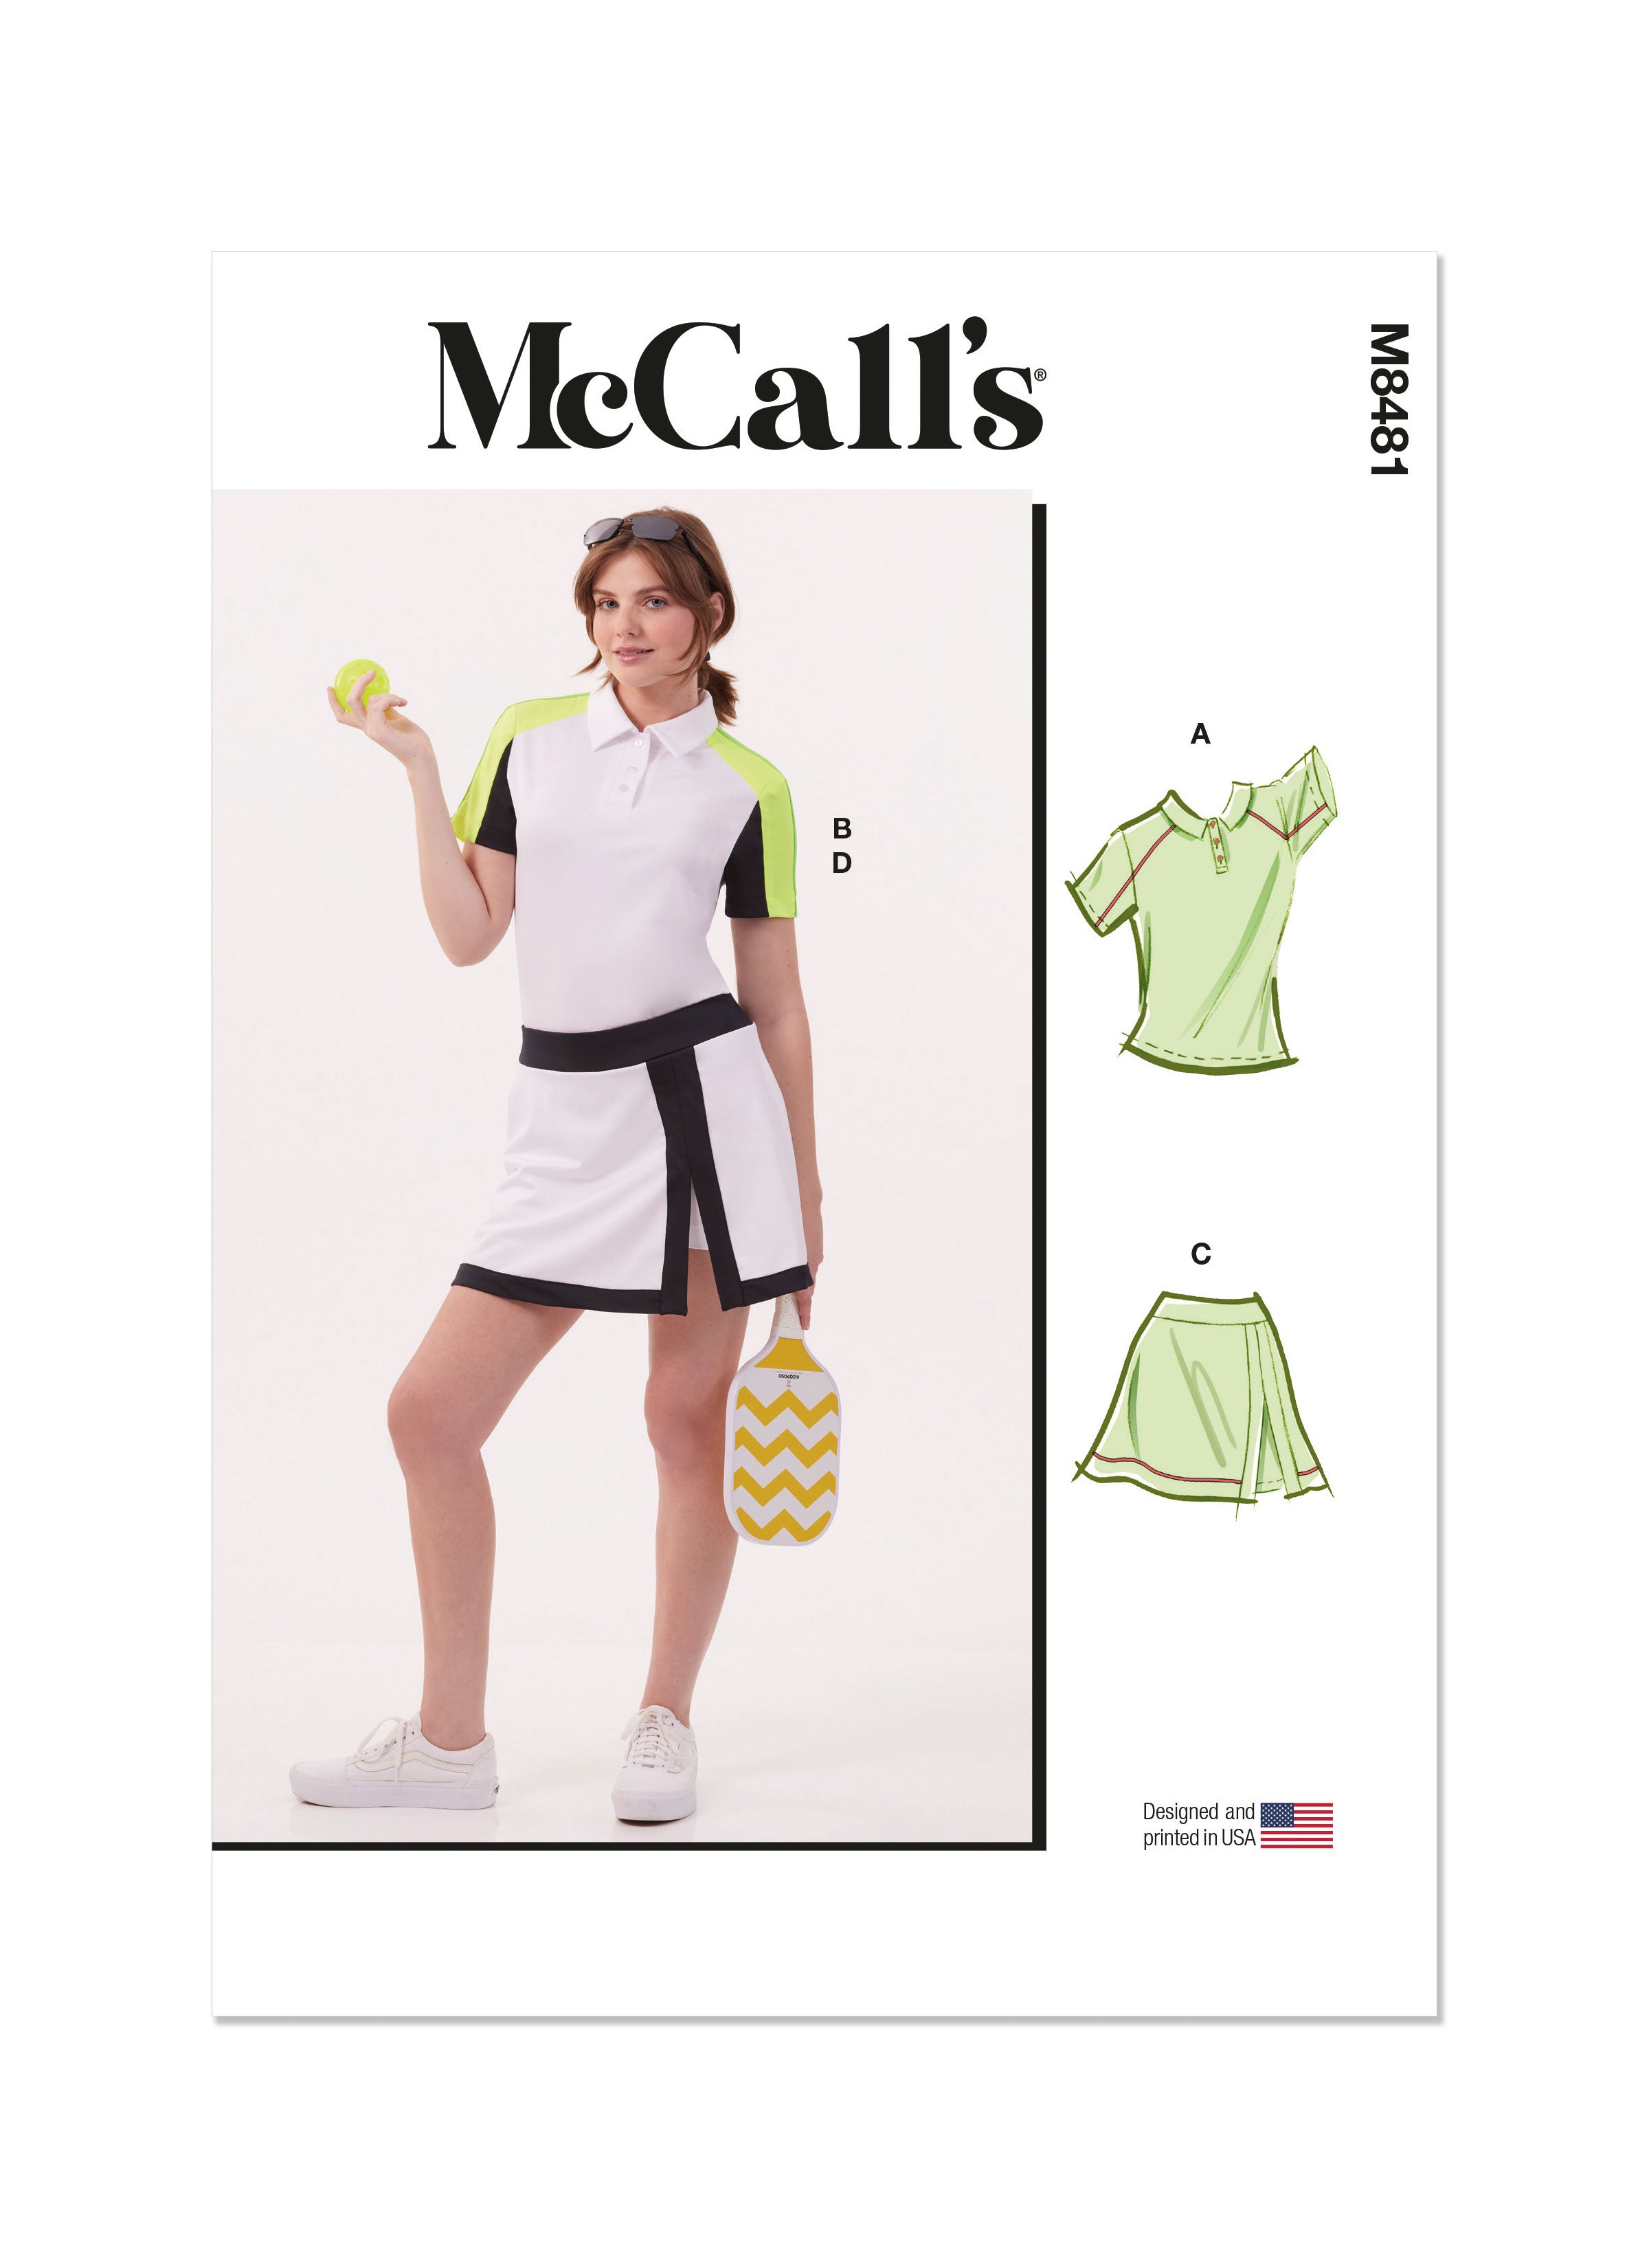 McCall's Sewing Pattern 8481 Misses' Knit Tops and Skorts from Jaycotts Sewing Supplies